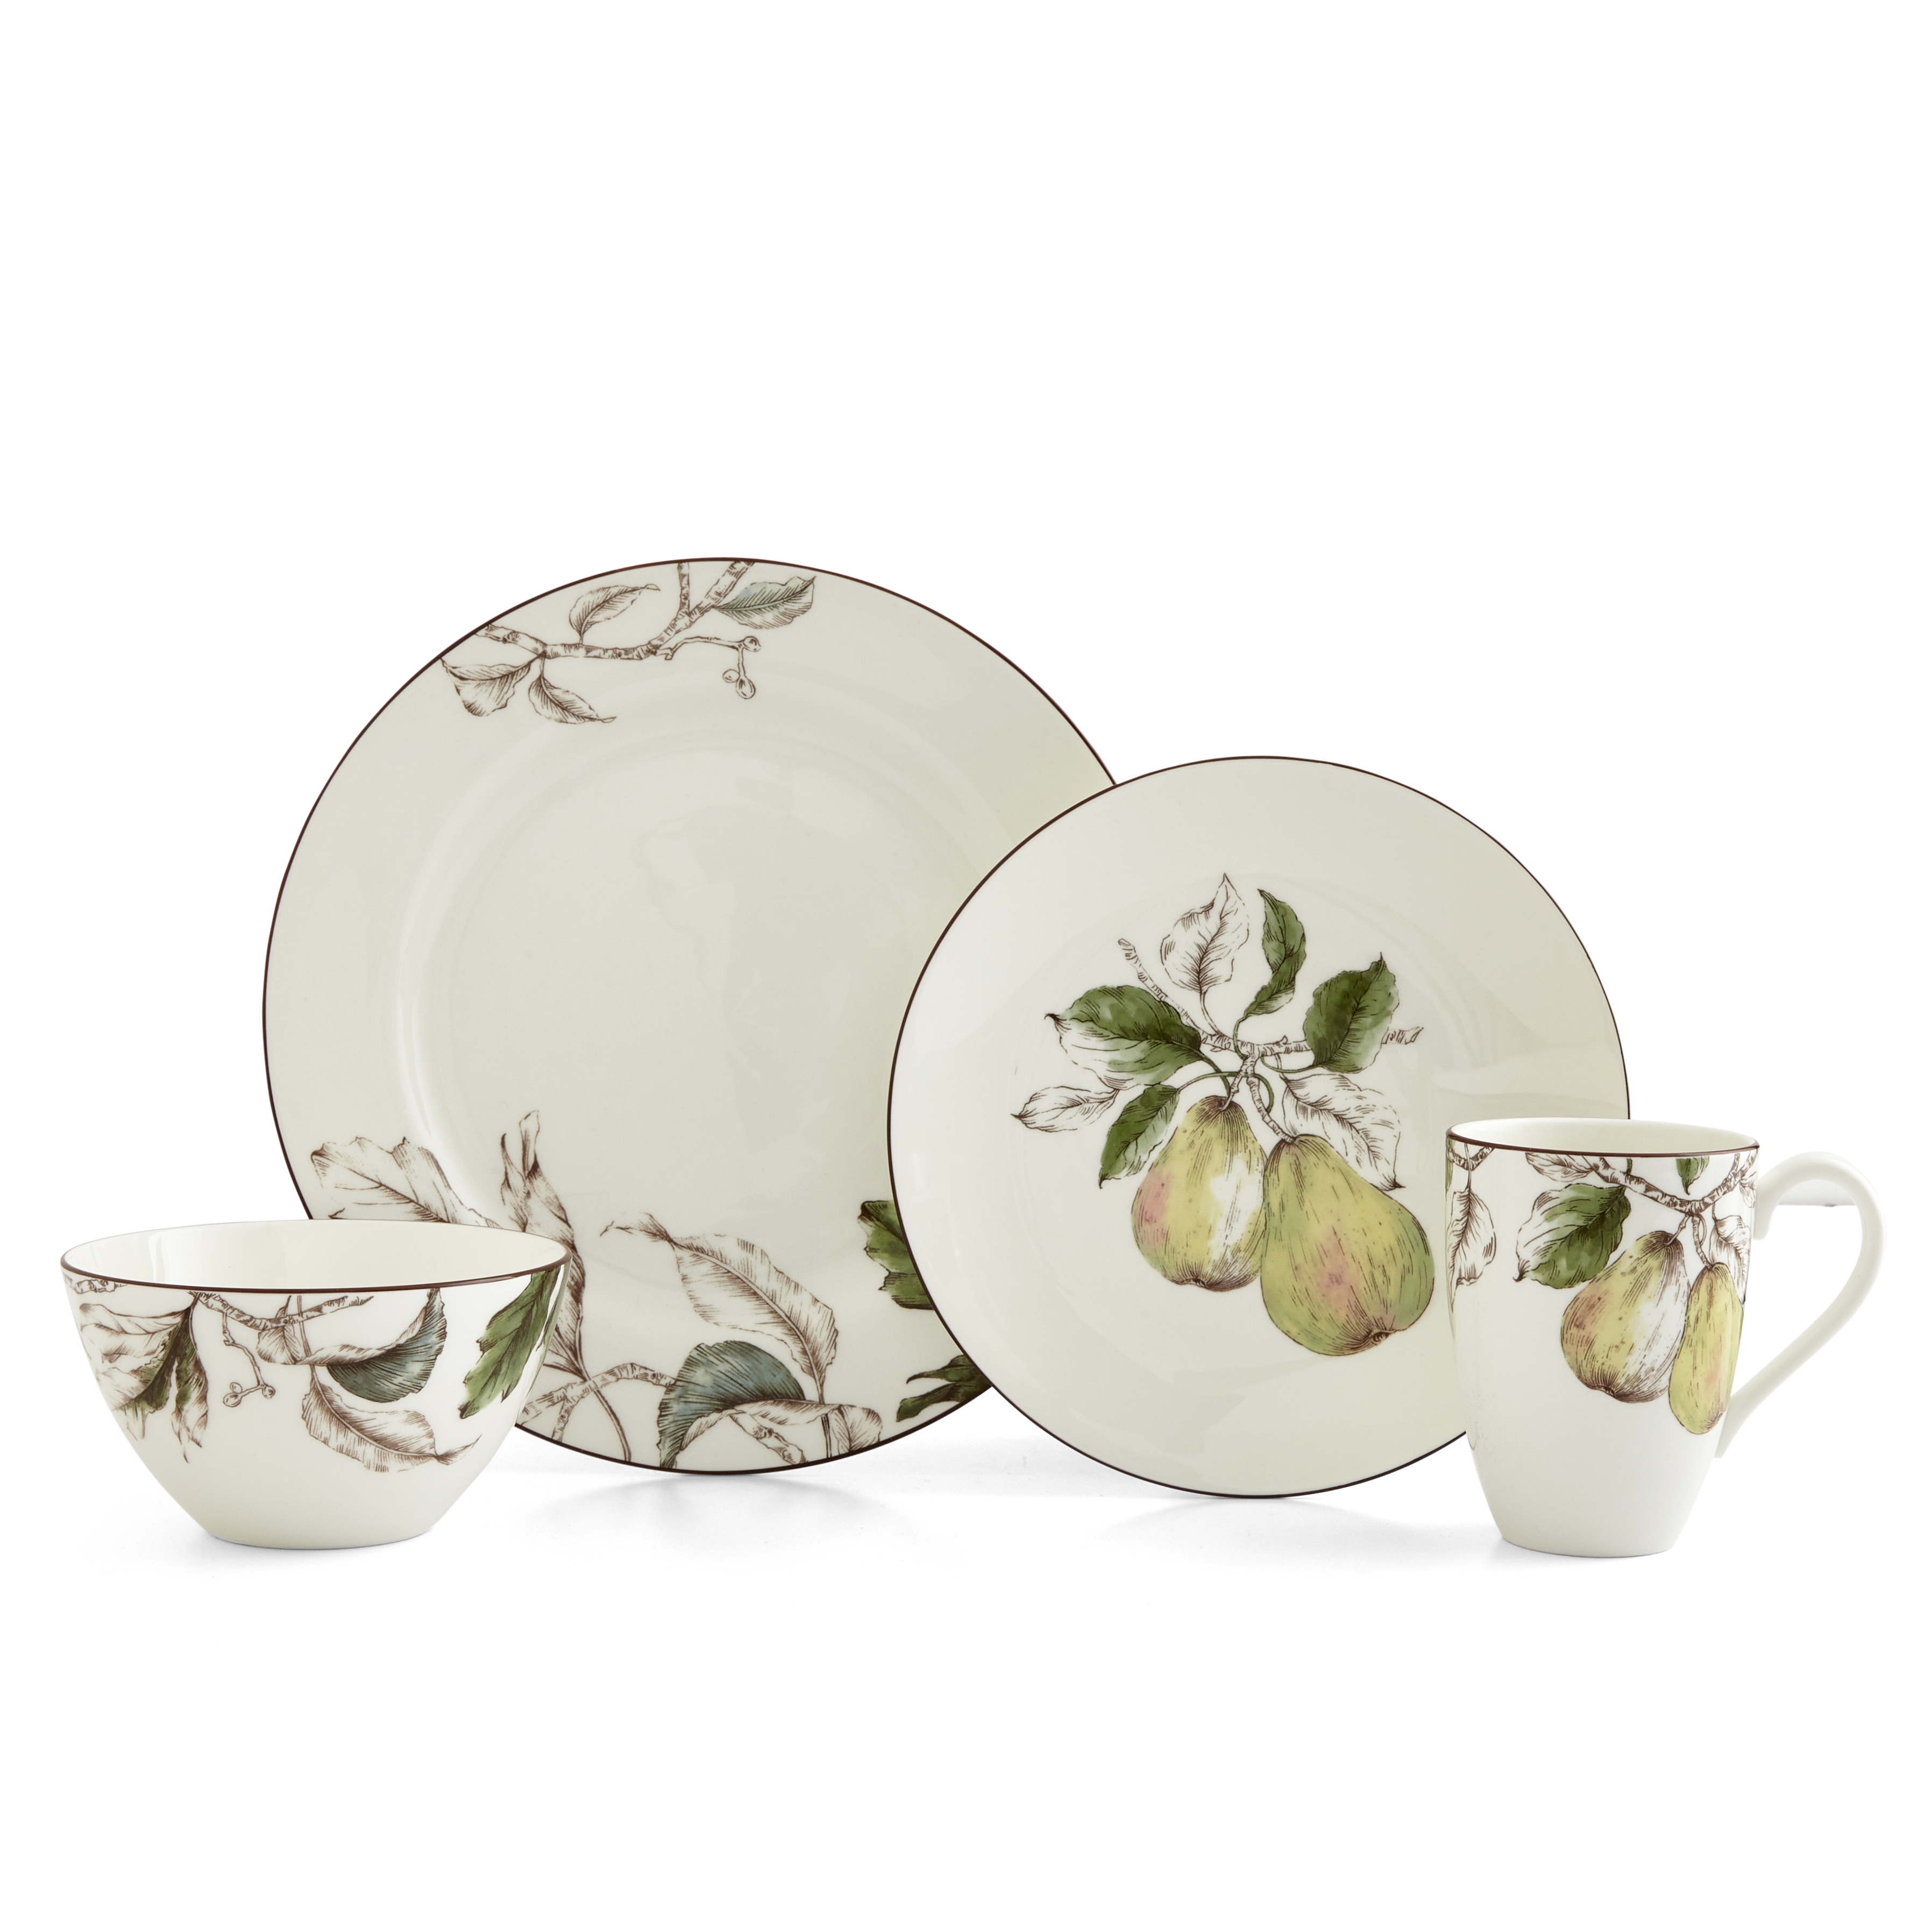 Nature's Bounty 4 Piece Place Setting (Pear) image number null